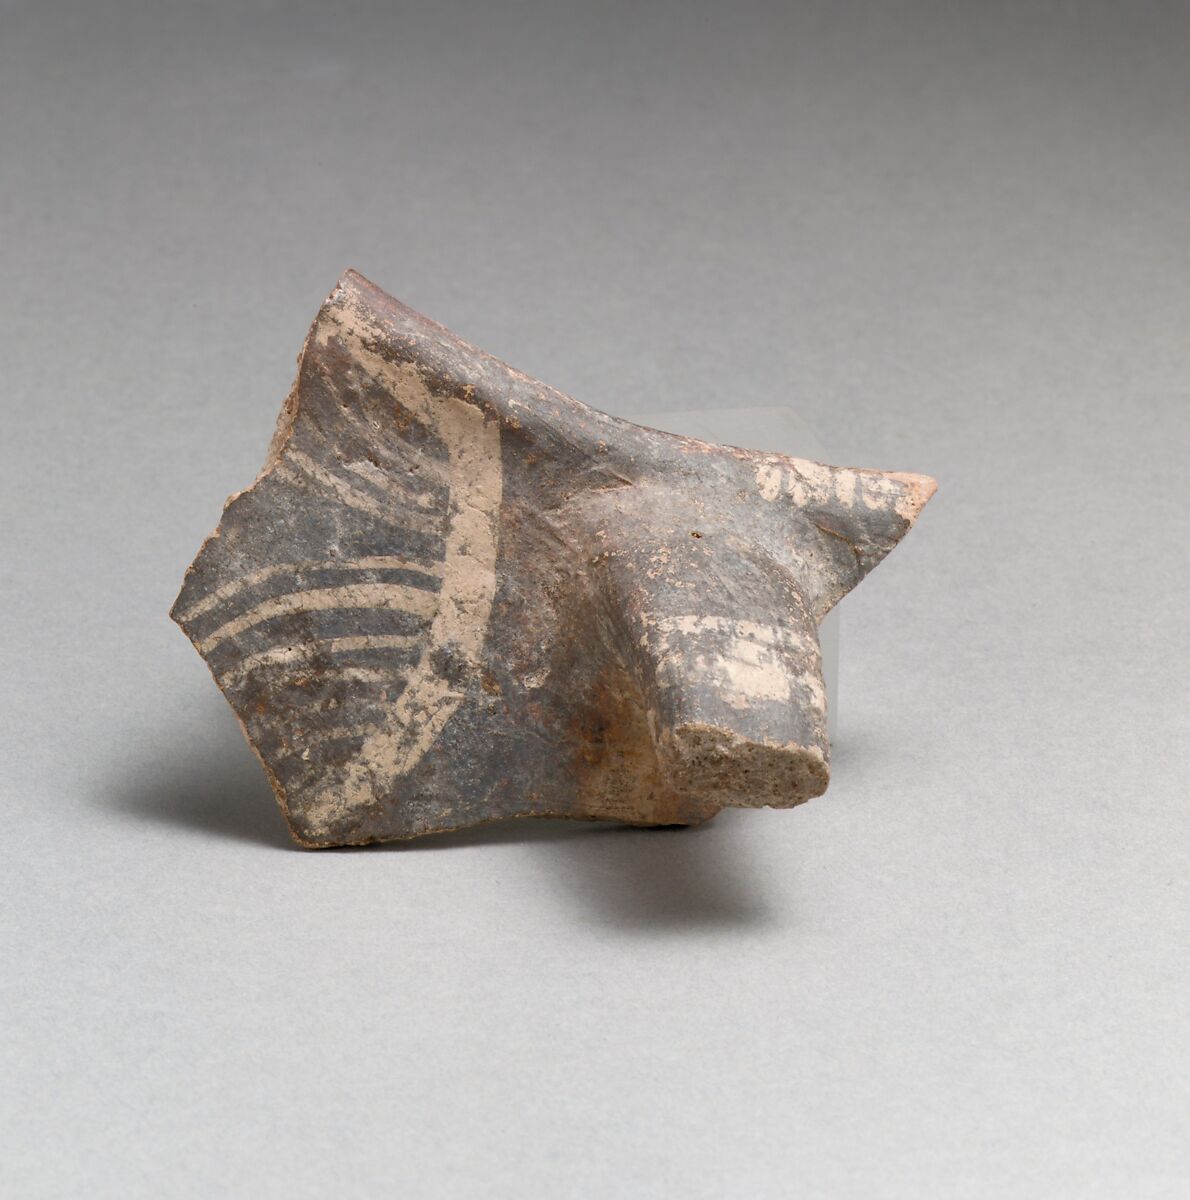 Terracotta rim and handle fragment from a jug, Terracotta, Minoan 